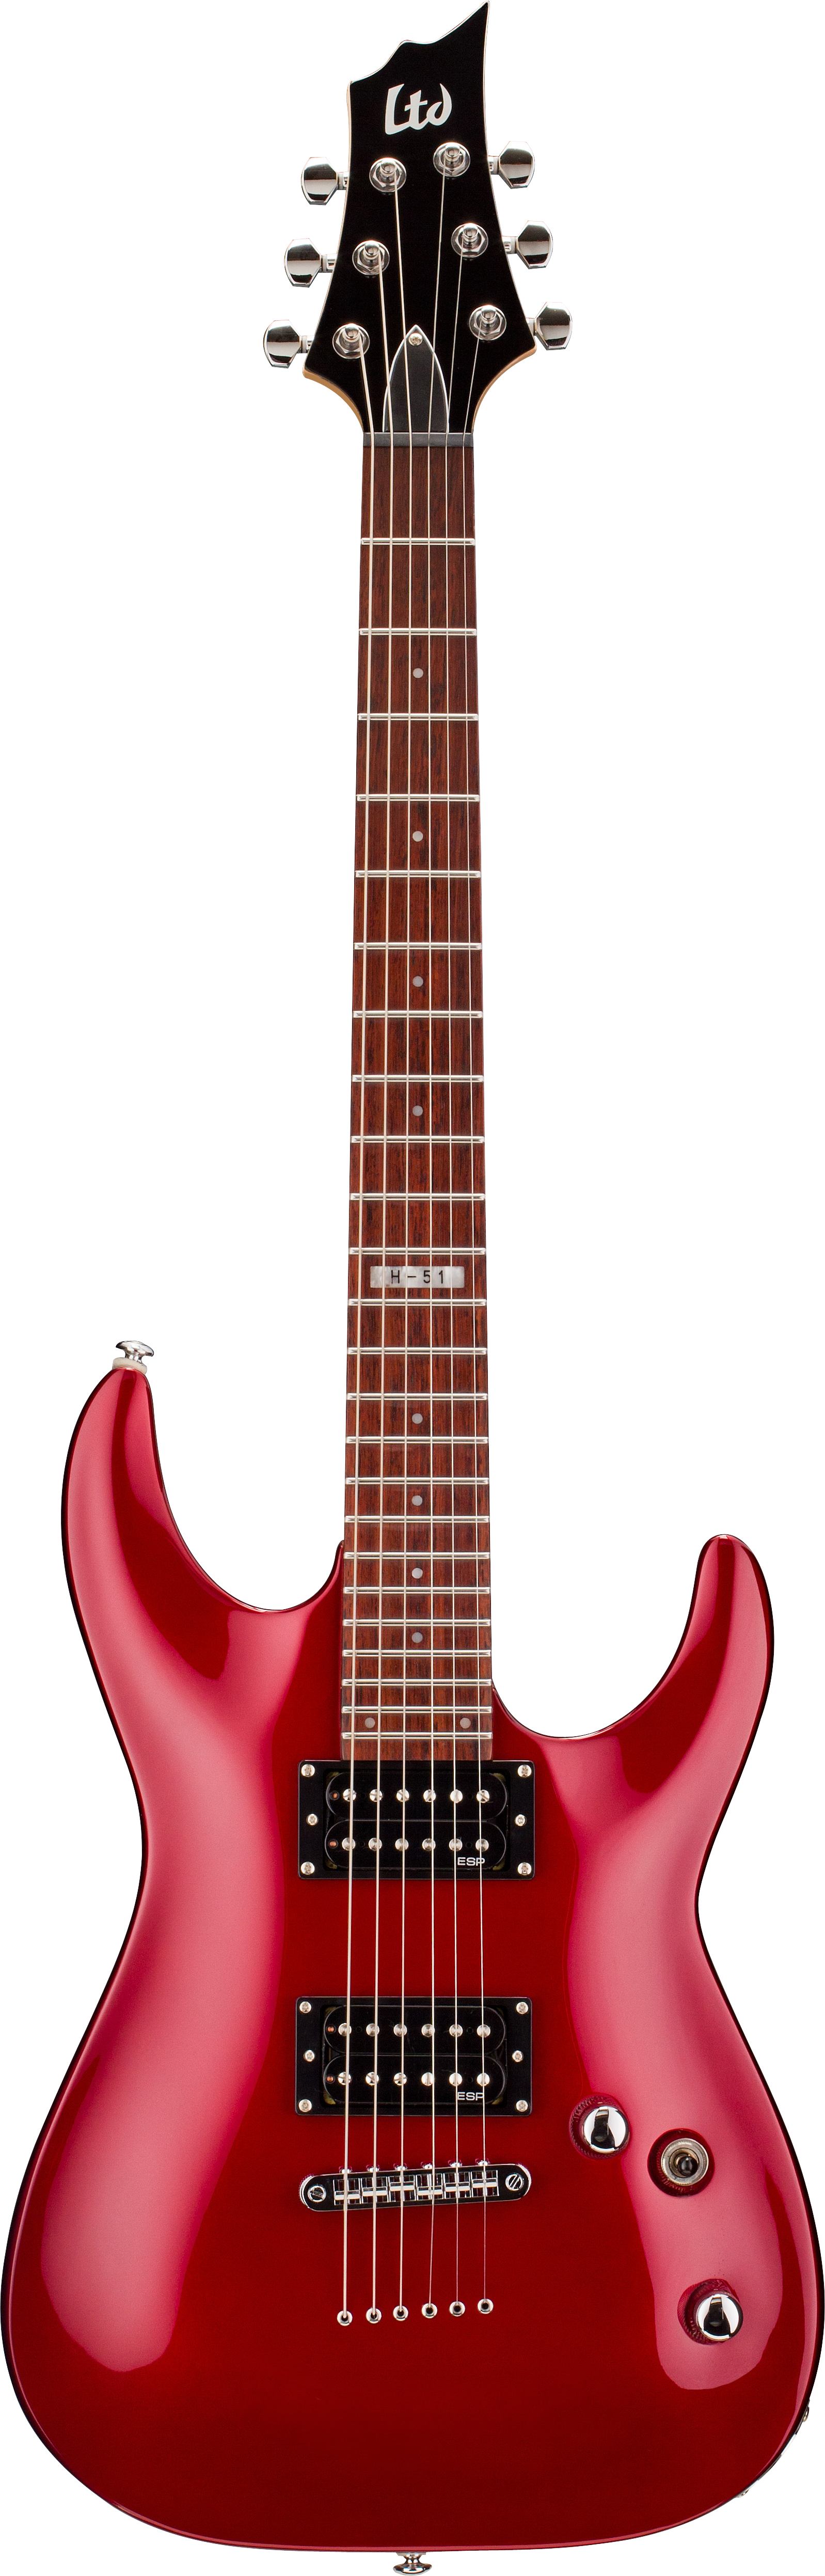 Guitar Electric Red Free HQ Image PNG Image